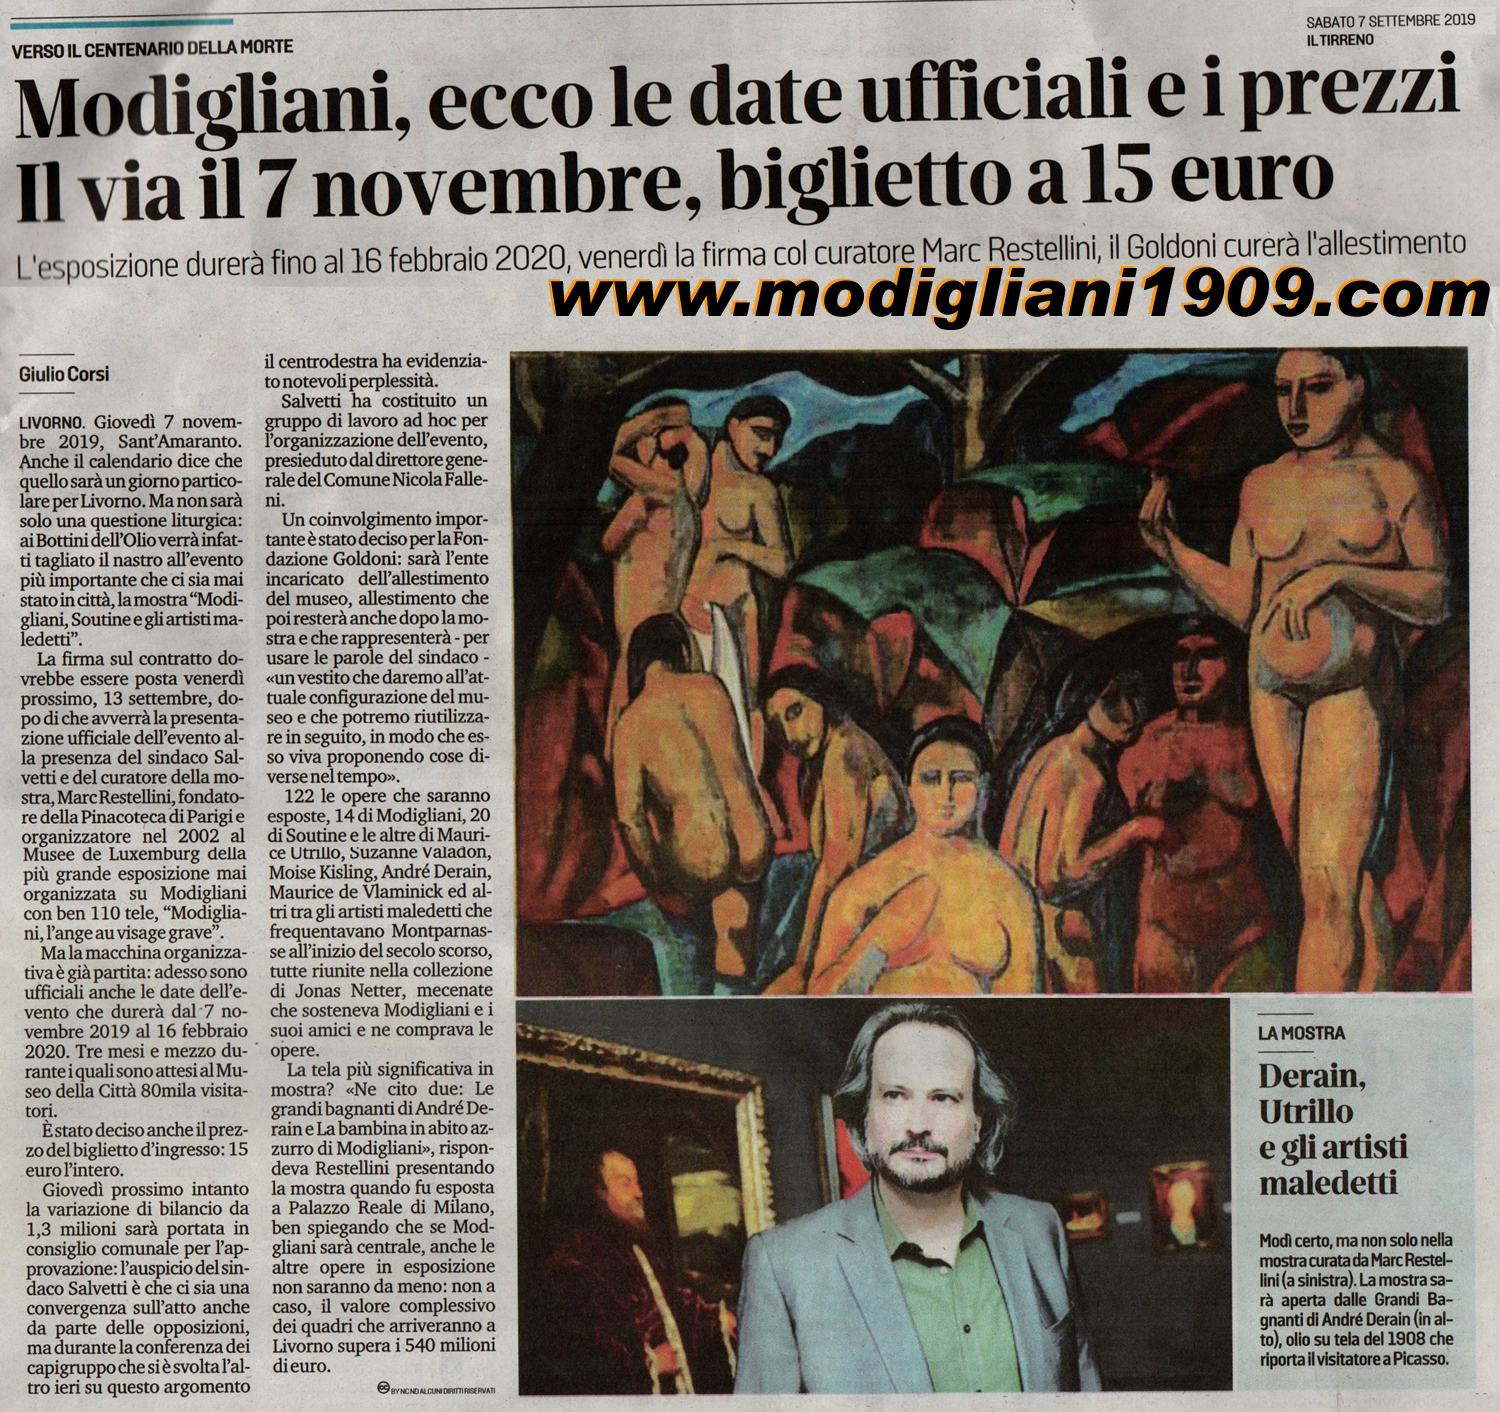 Modigliani's exhibition will last until February 2020 - the signature with the curator Marc Restellini will shortly - Goldoni will take care of the setting